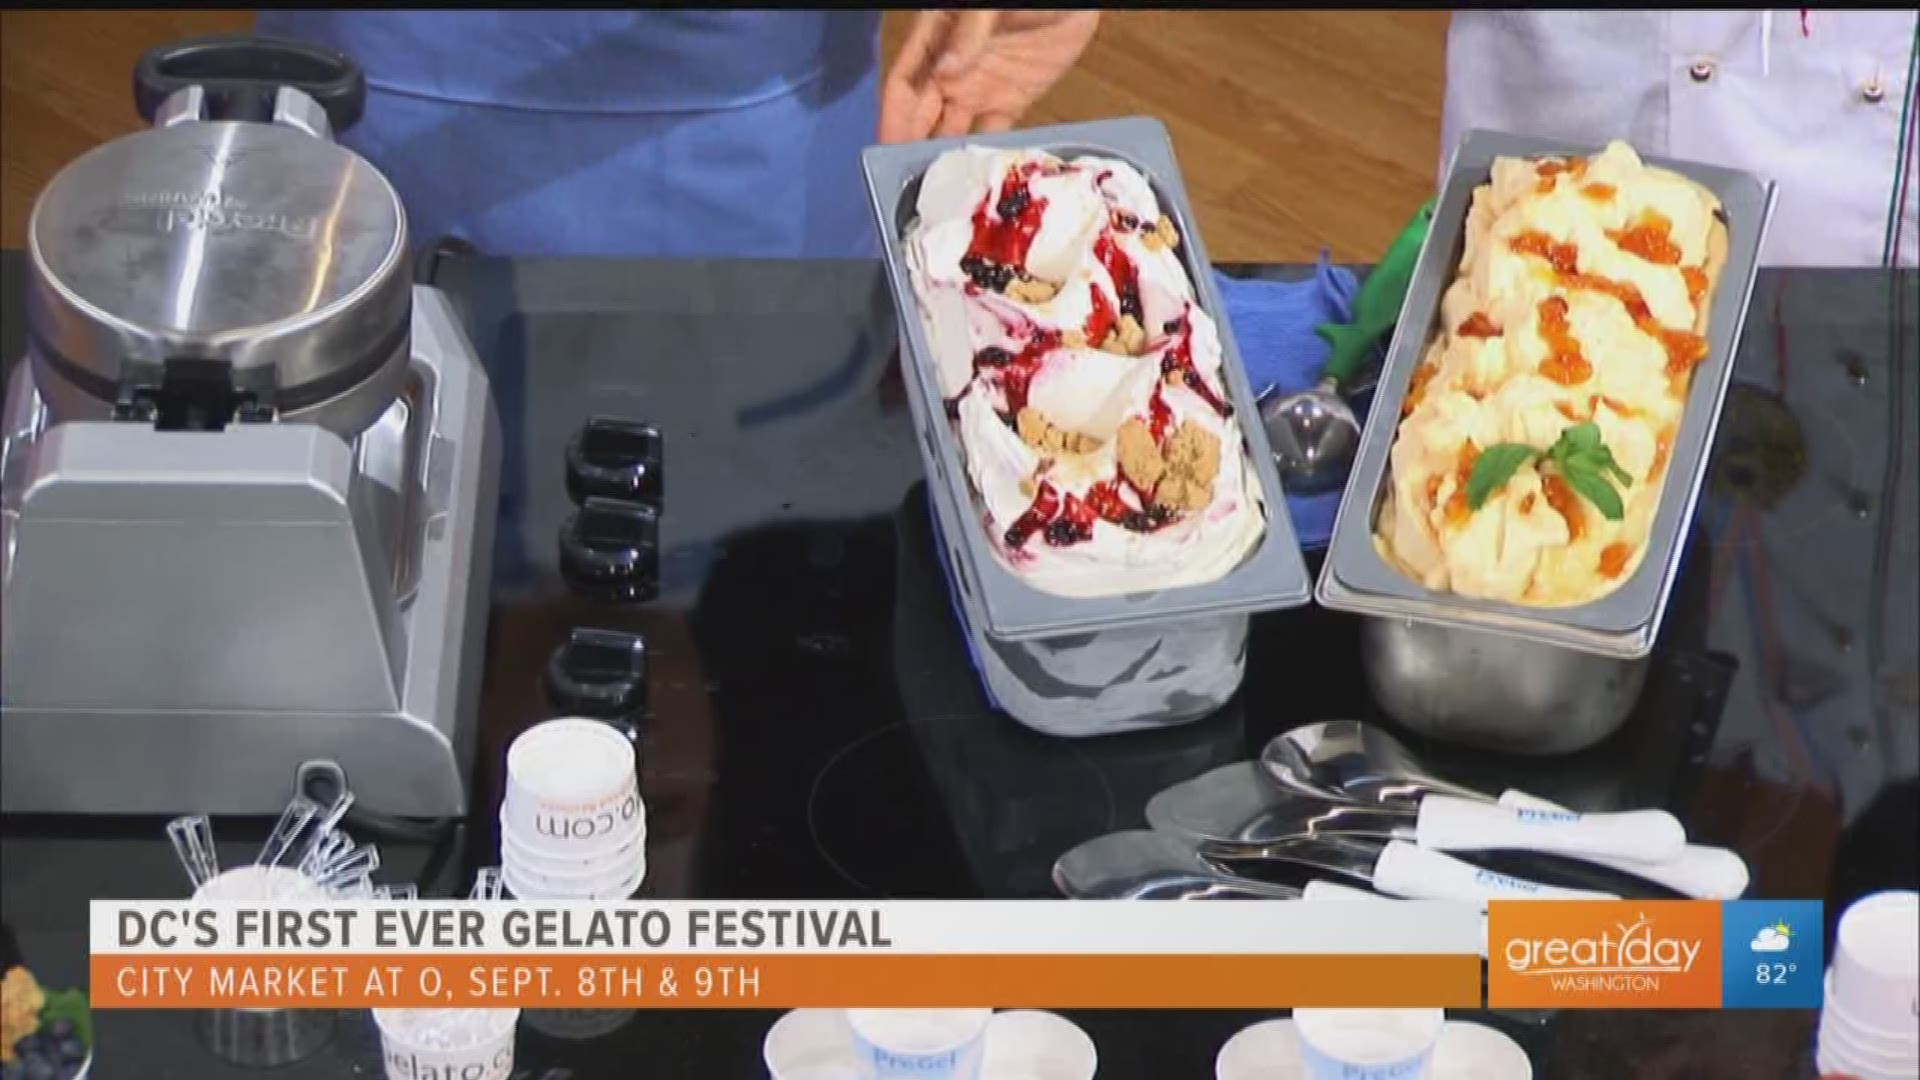 Two international gelato masters share how you can enjoy DC's first gelato festival this weekend, September 8th & 9th at City Market at O. 